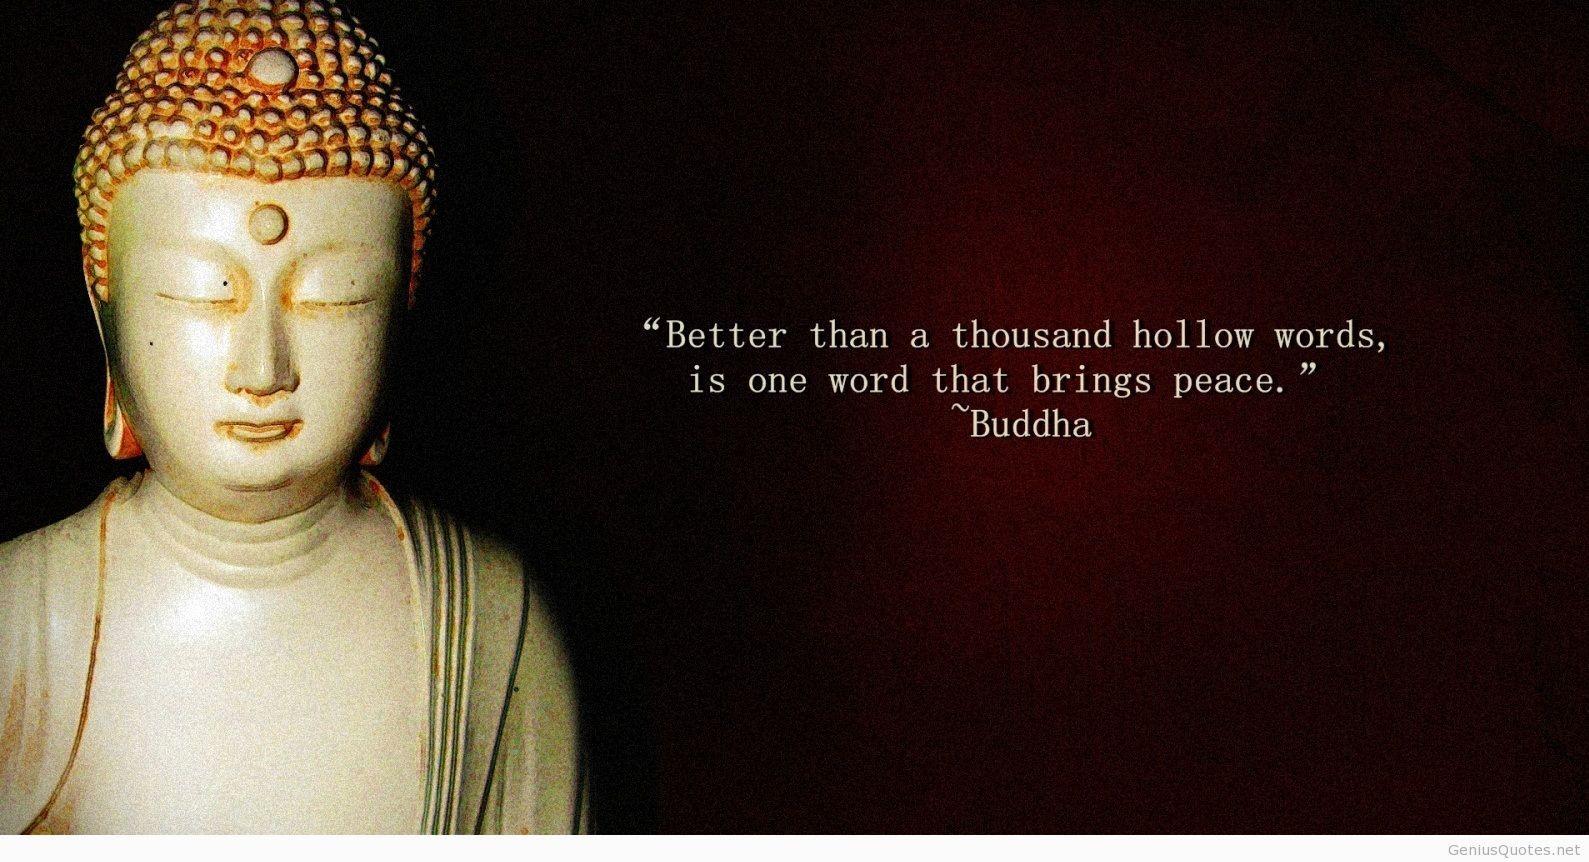 Quotes From the Buddha Super top Buddha Quotes HD Wallpaper